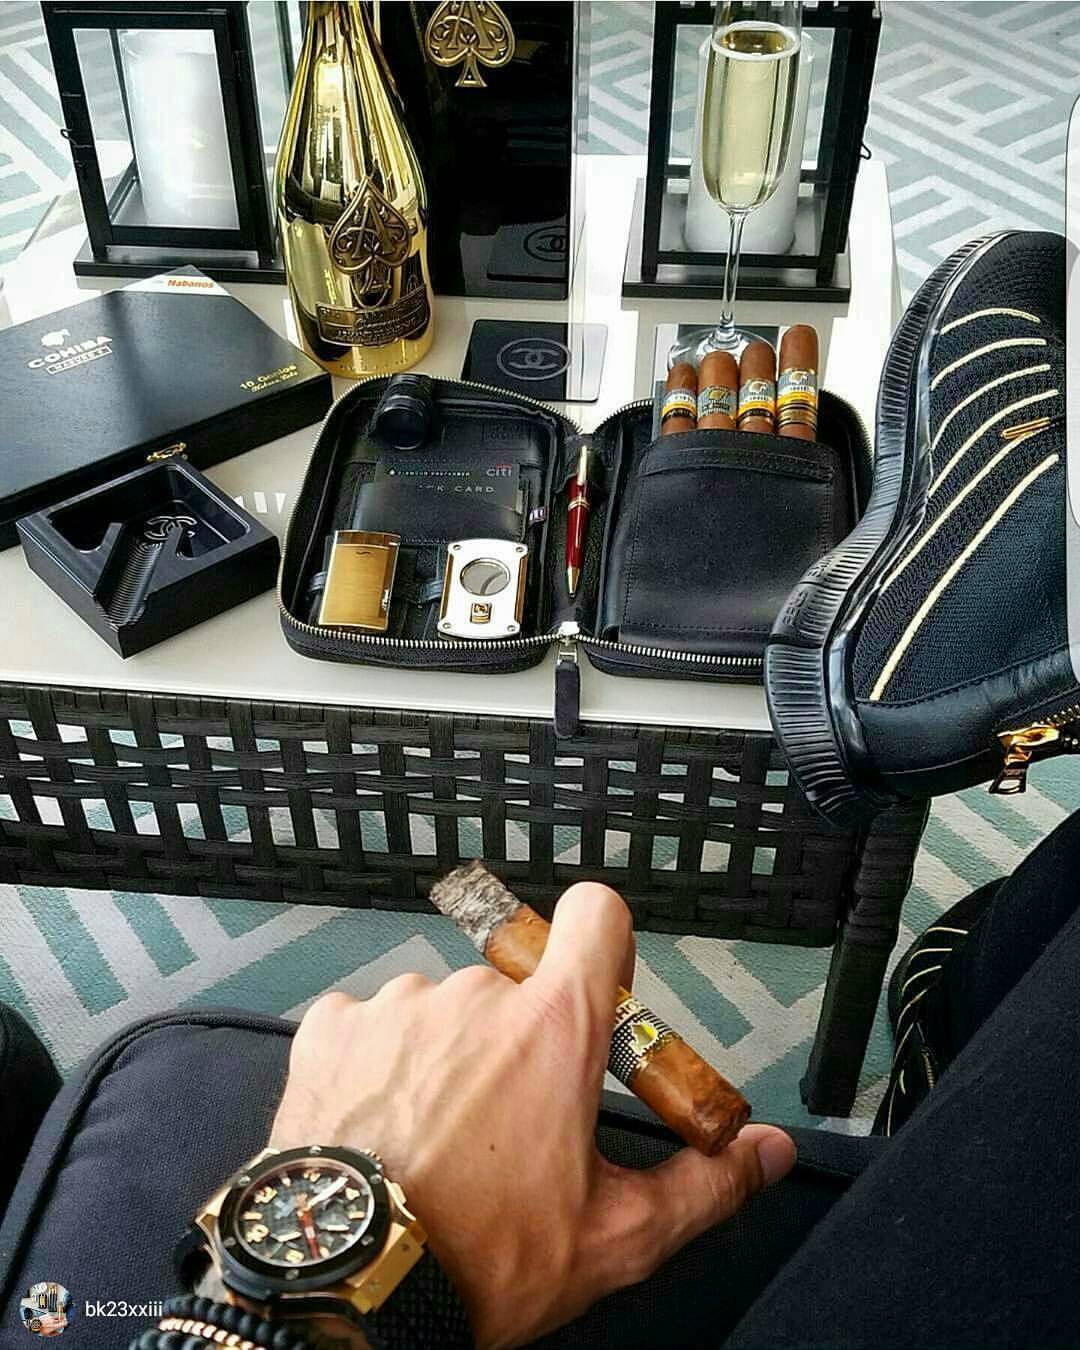 Because every Saturday should be like this!!
♠👌🔥💨
#Repost 📸 from @bk23xxiii
WWW.CIGARSANDWHISKEYS.COM
Like 👍, Repost 🔃, Tag 🔖 Follow 👣 Us & Subscribe ✍...